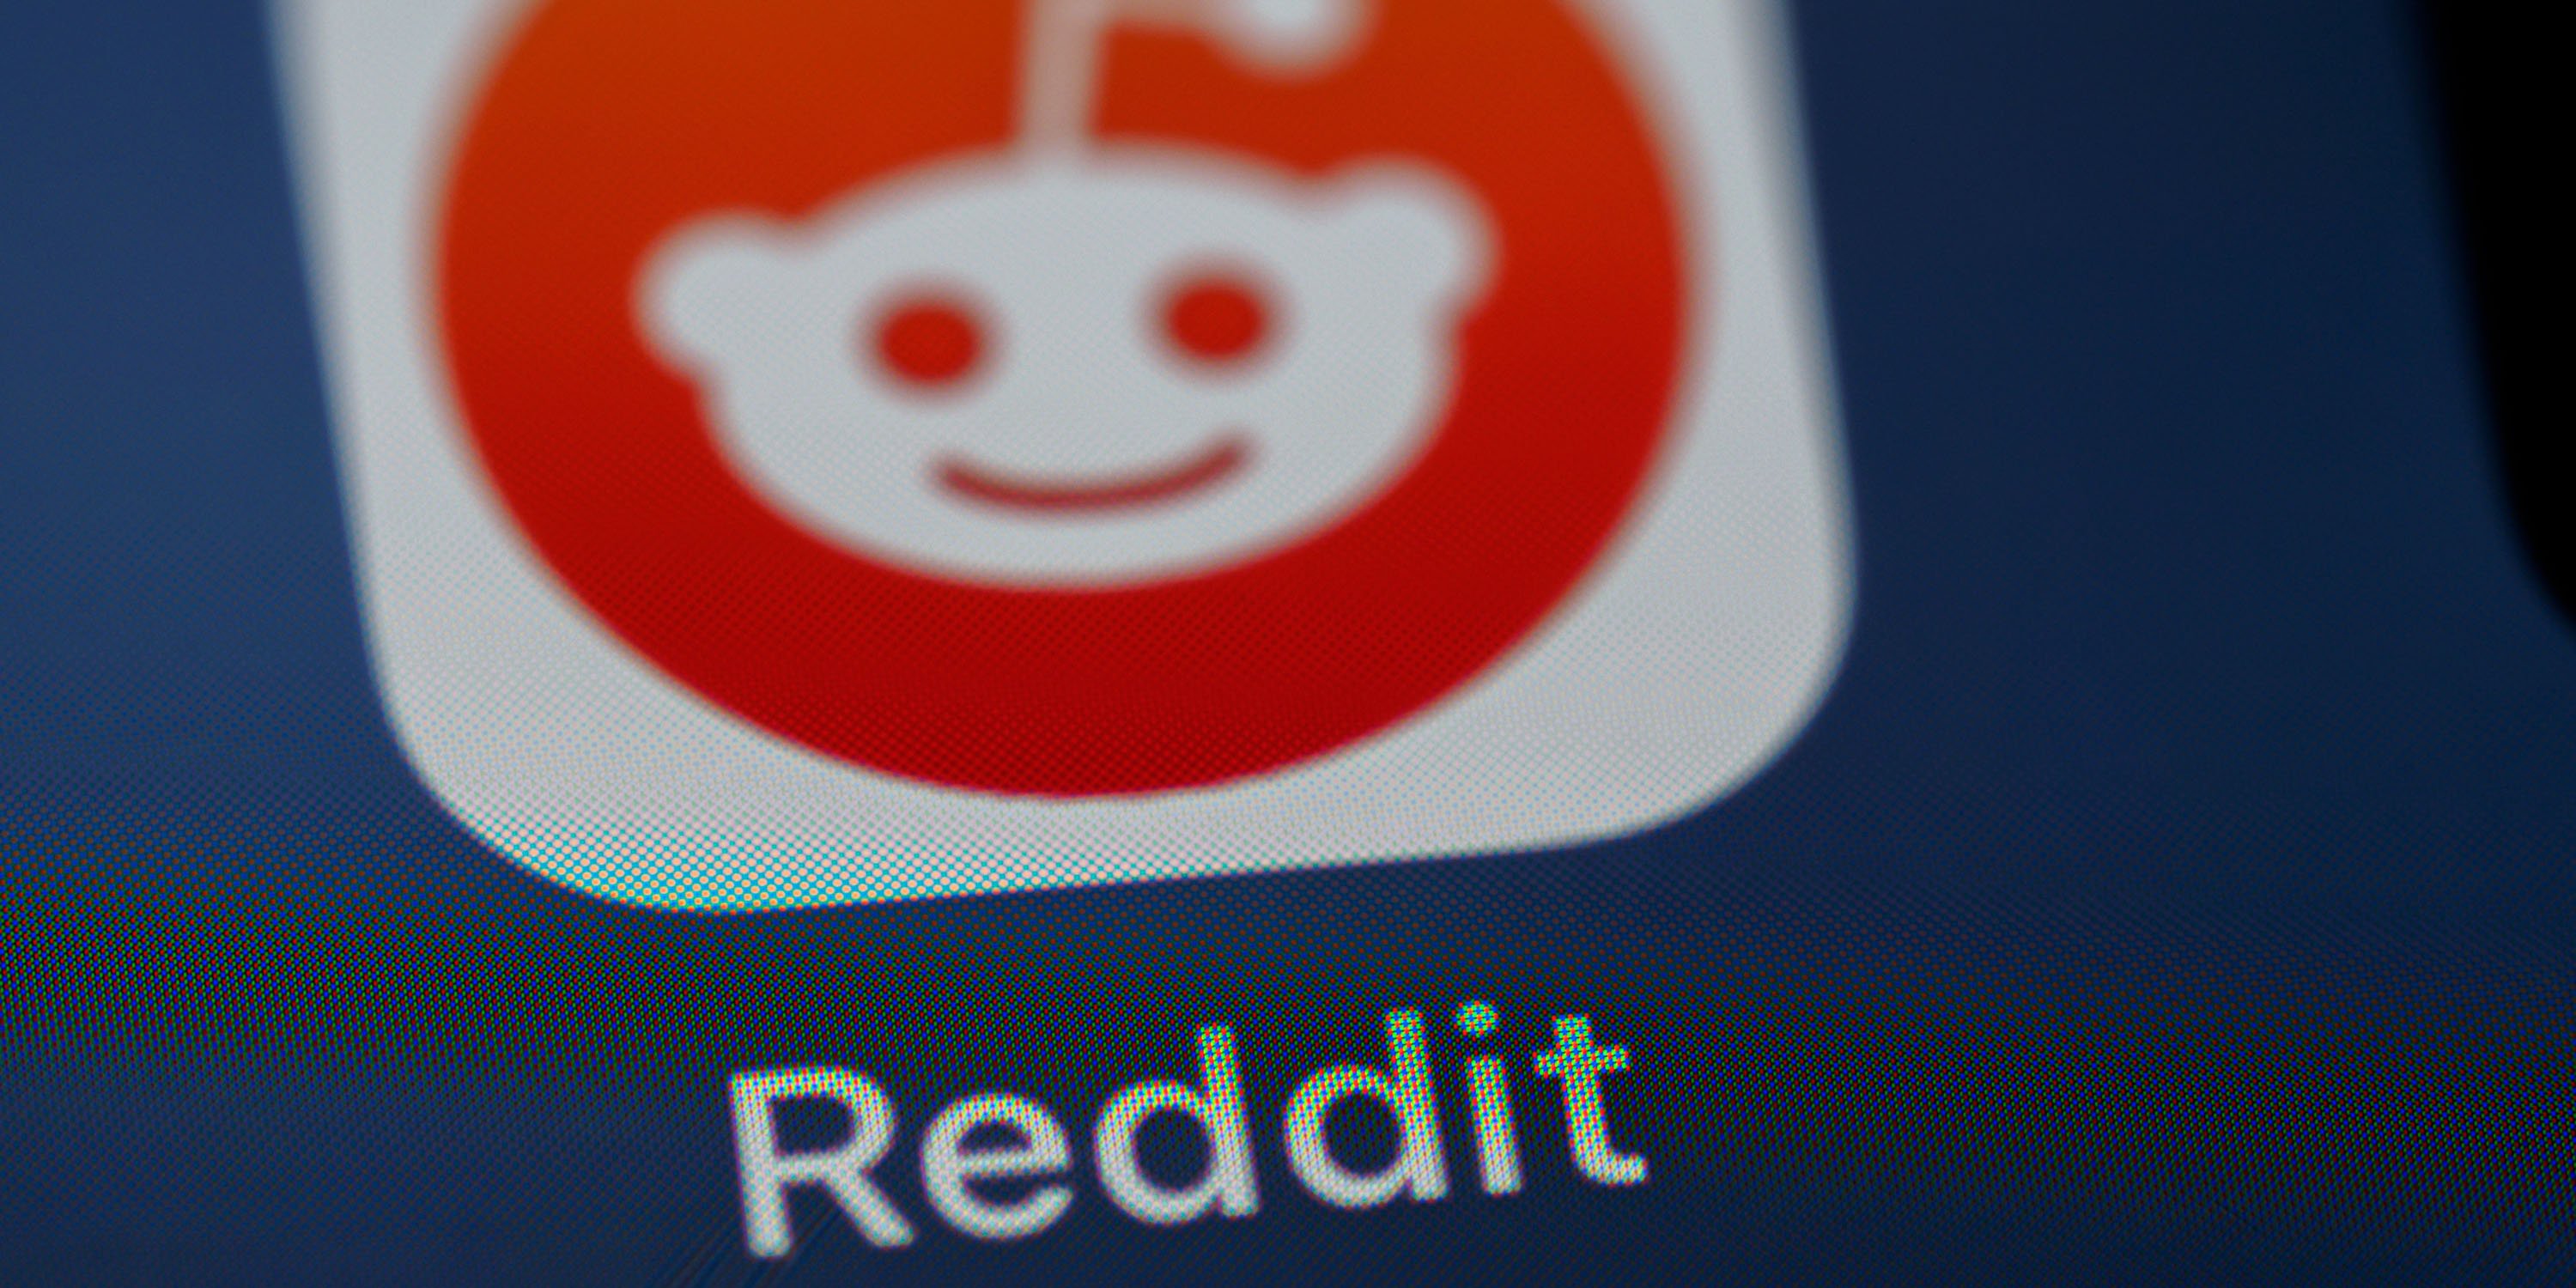 Reddit confirms security incident, but users data is safe